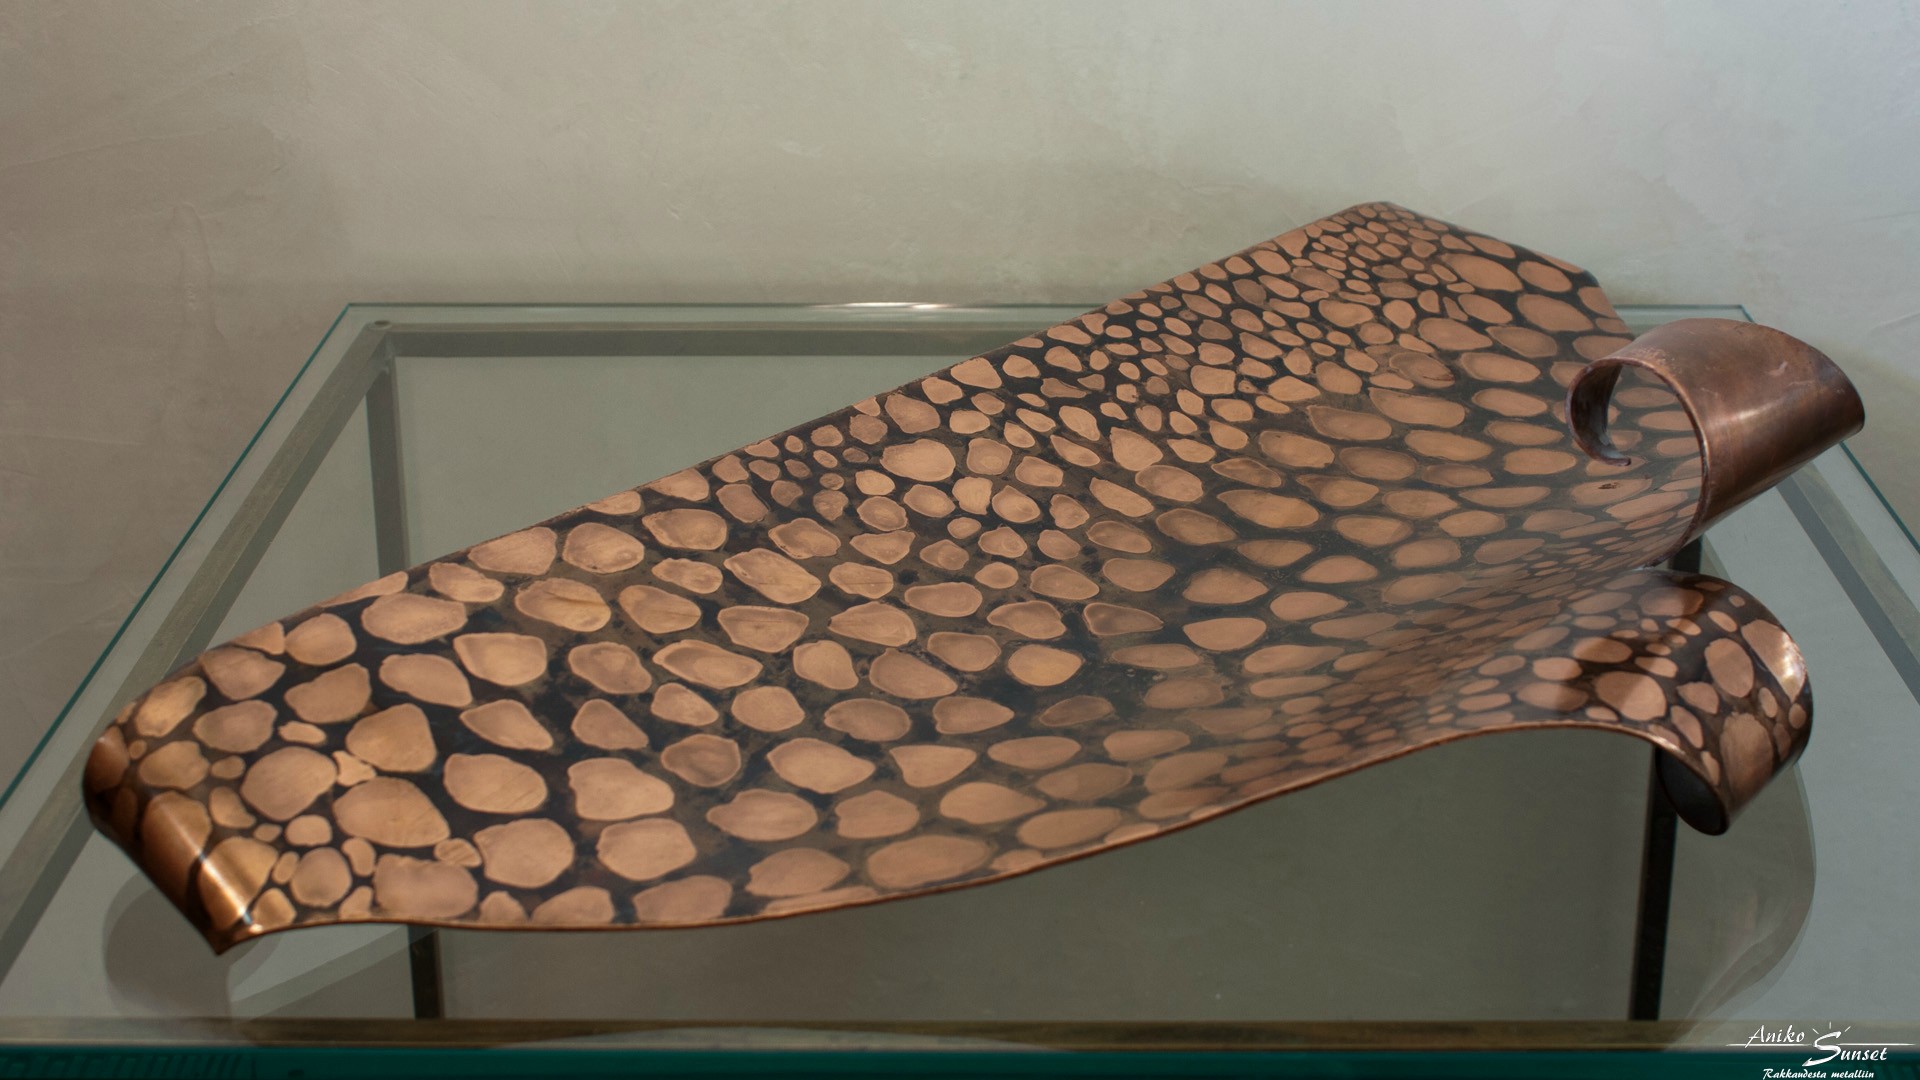 Platter "Ray" - 2 mm copper sheet patinated using a special technique, 580x260 mm